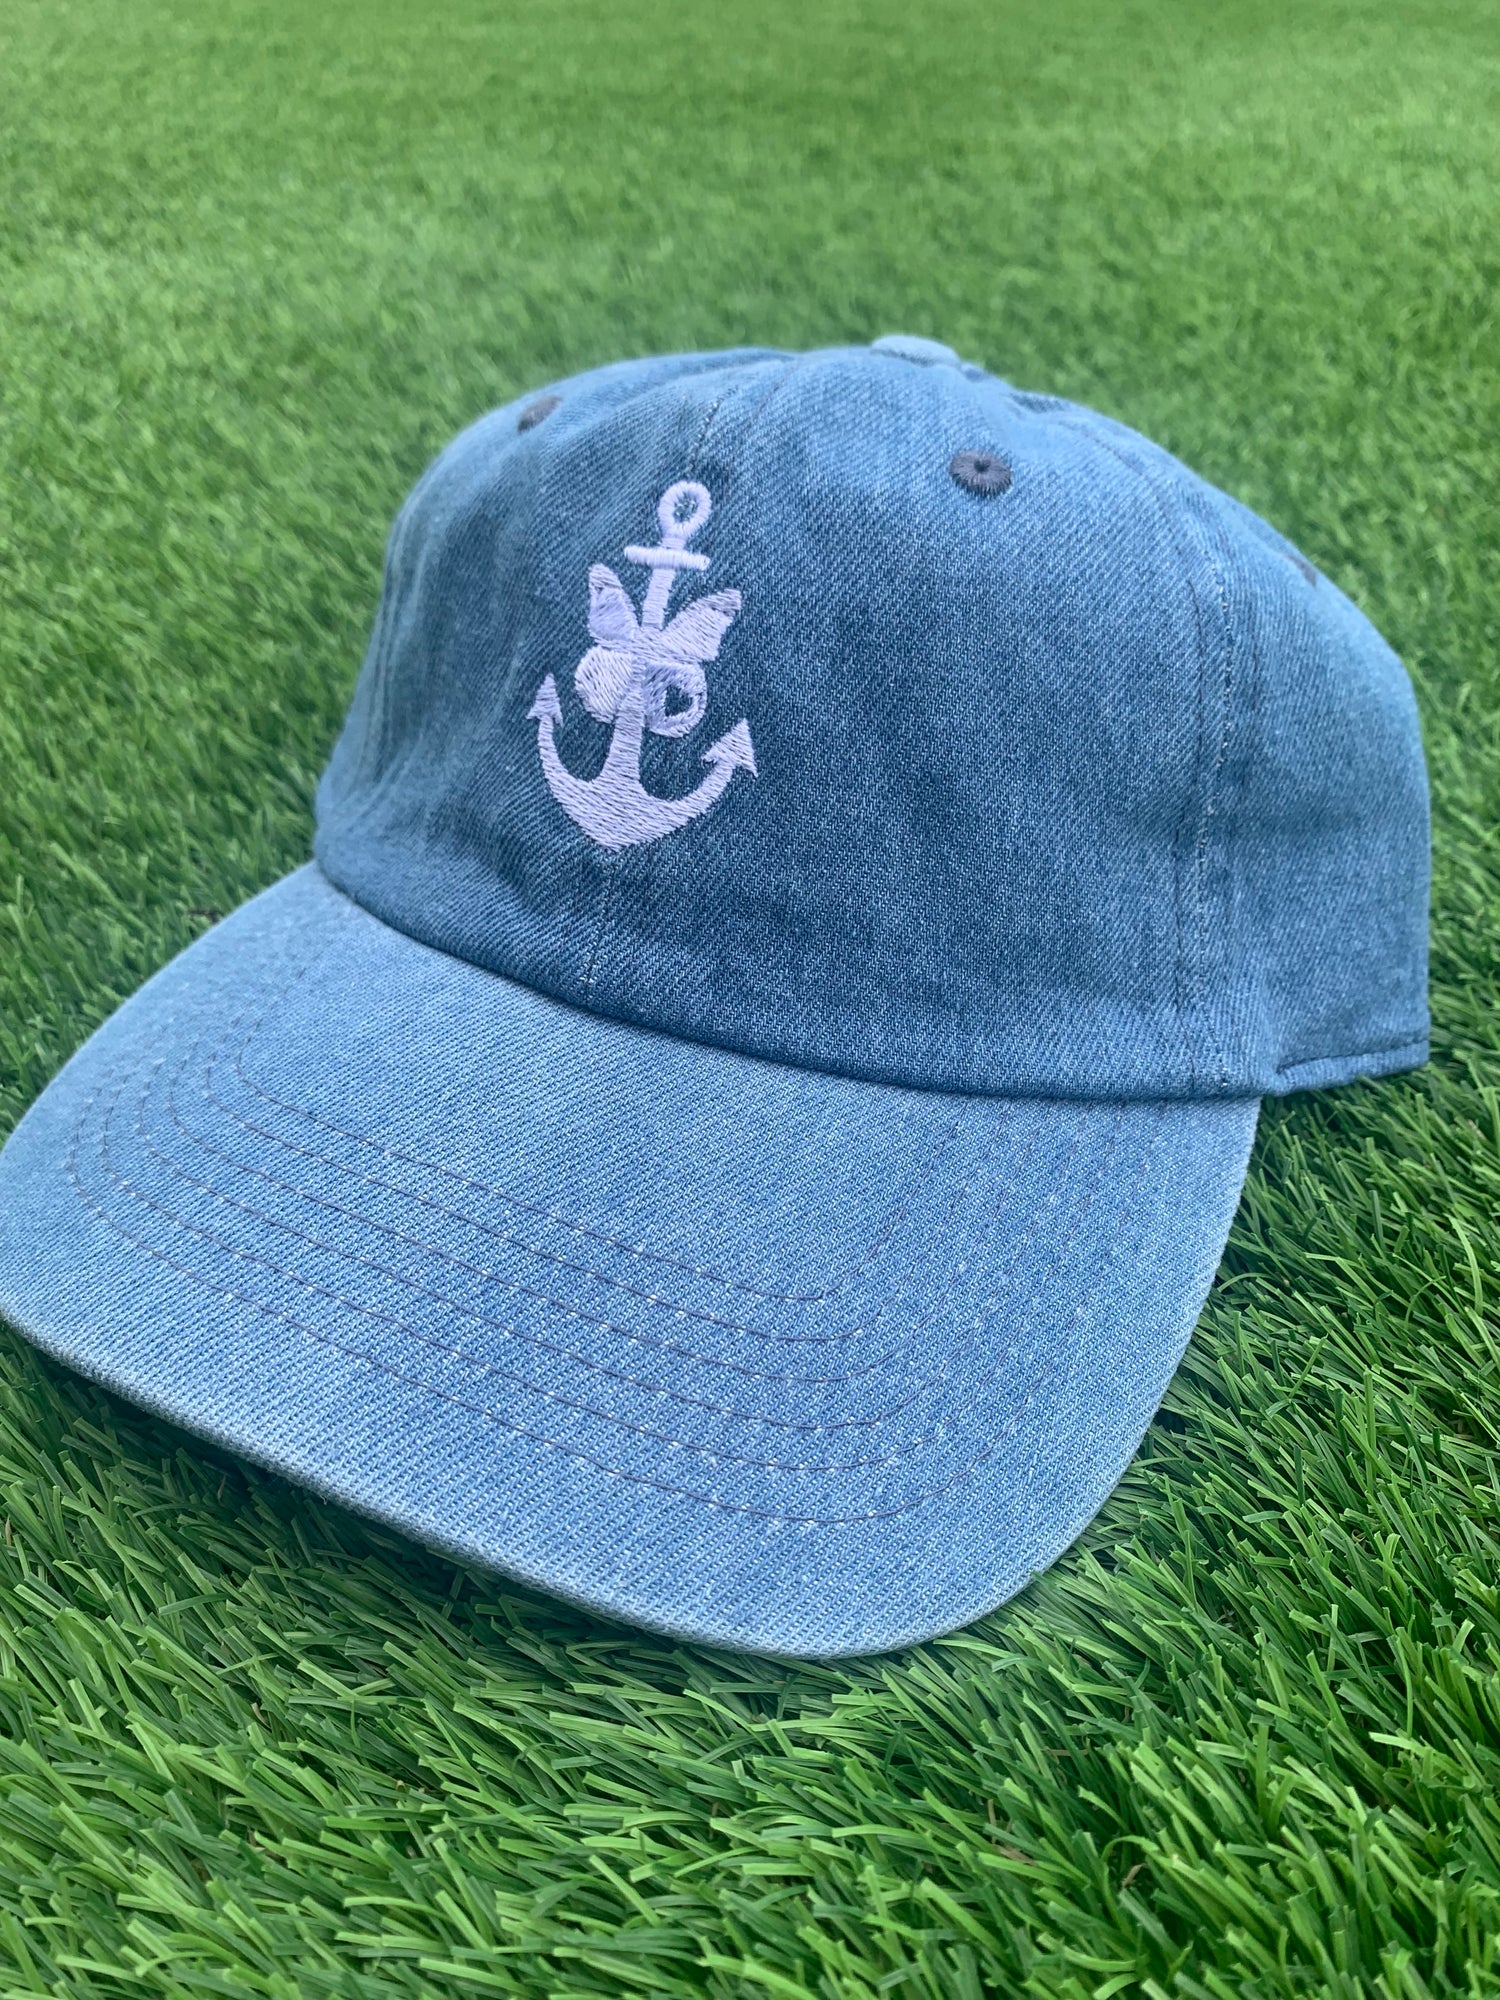 GTP logo cap with a bright, bold design. The logo is displayed prominently on the front of the cap, making a statement and showing off brand or personal style. The cap is made of durable, high-quality materials for long-lasting wear. Perfect for both comfort and fashion.